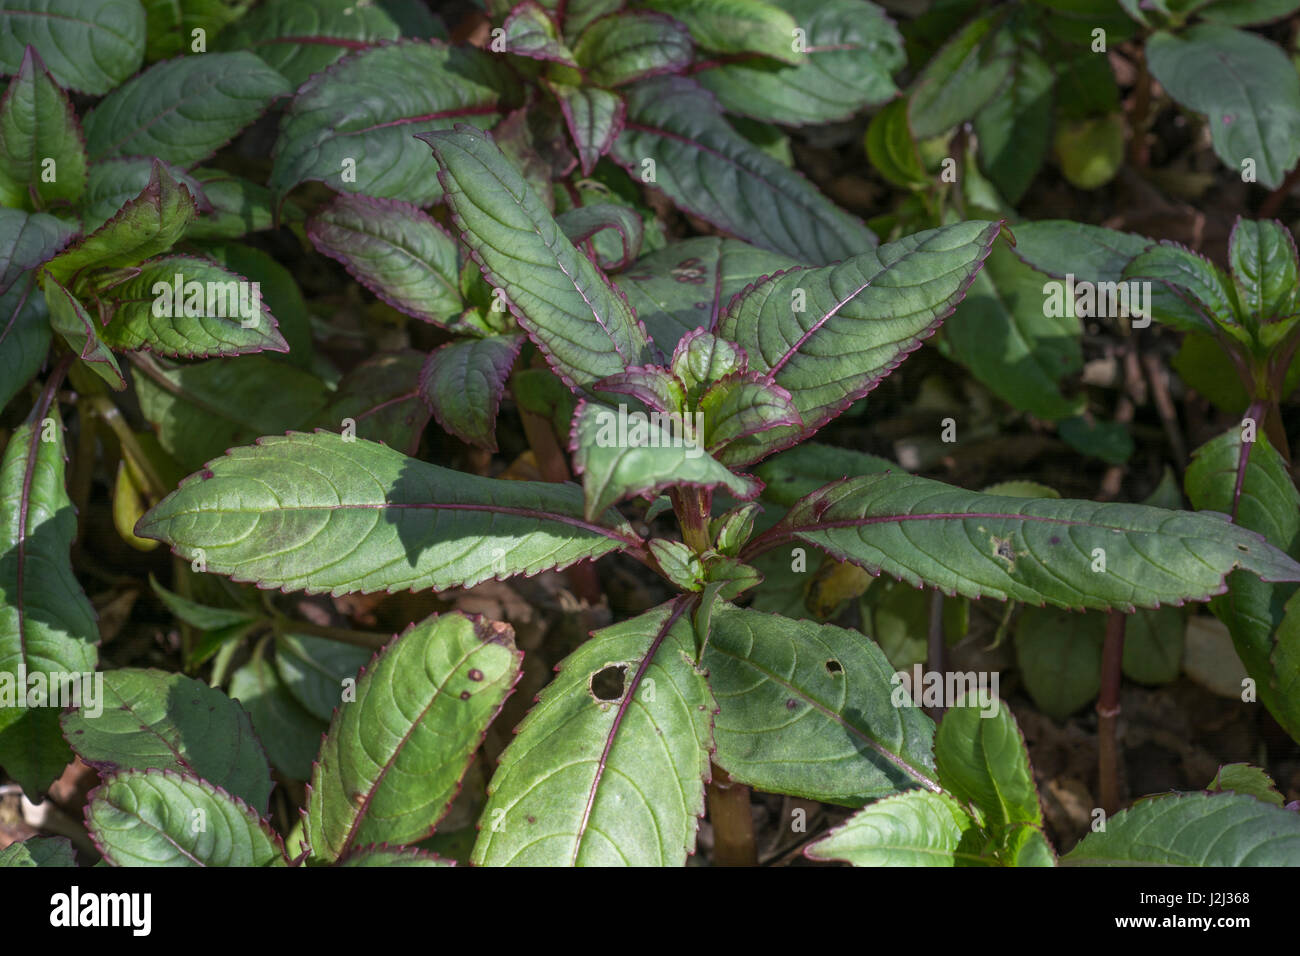 Young pre-flowering foliage / leaves of Himalayan Balsam / Impatiens glandulifera - a troublesome invasive weed of rivers and wetlands, river banks. Stock Photo